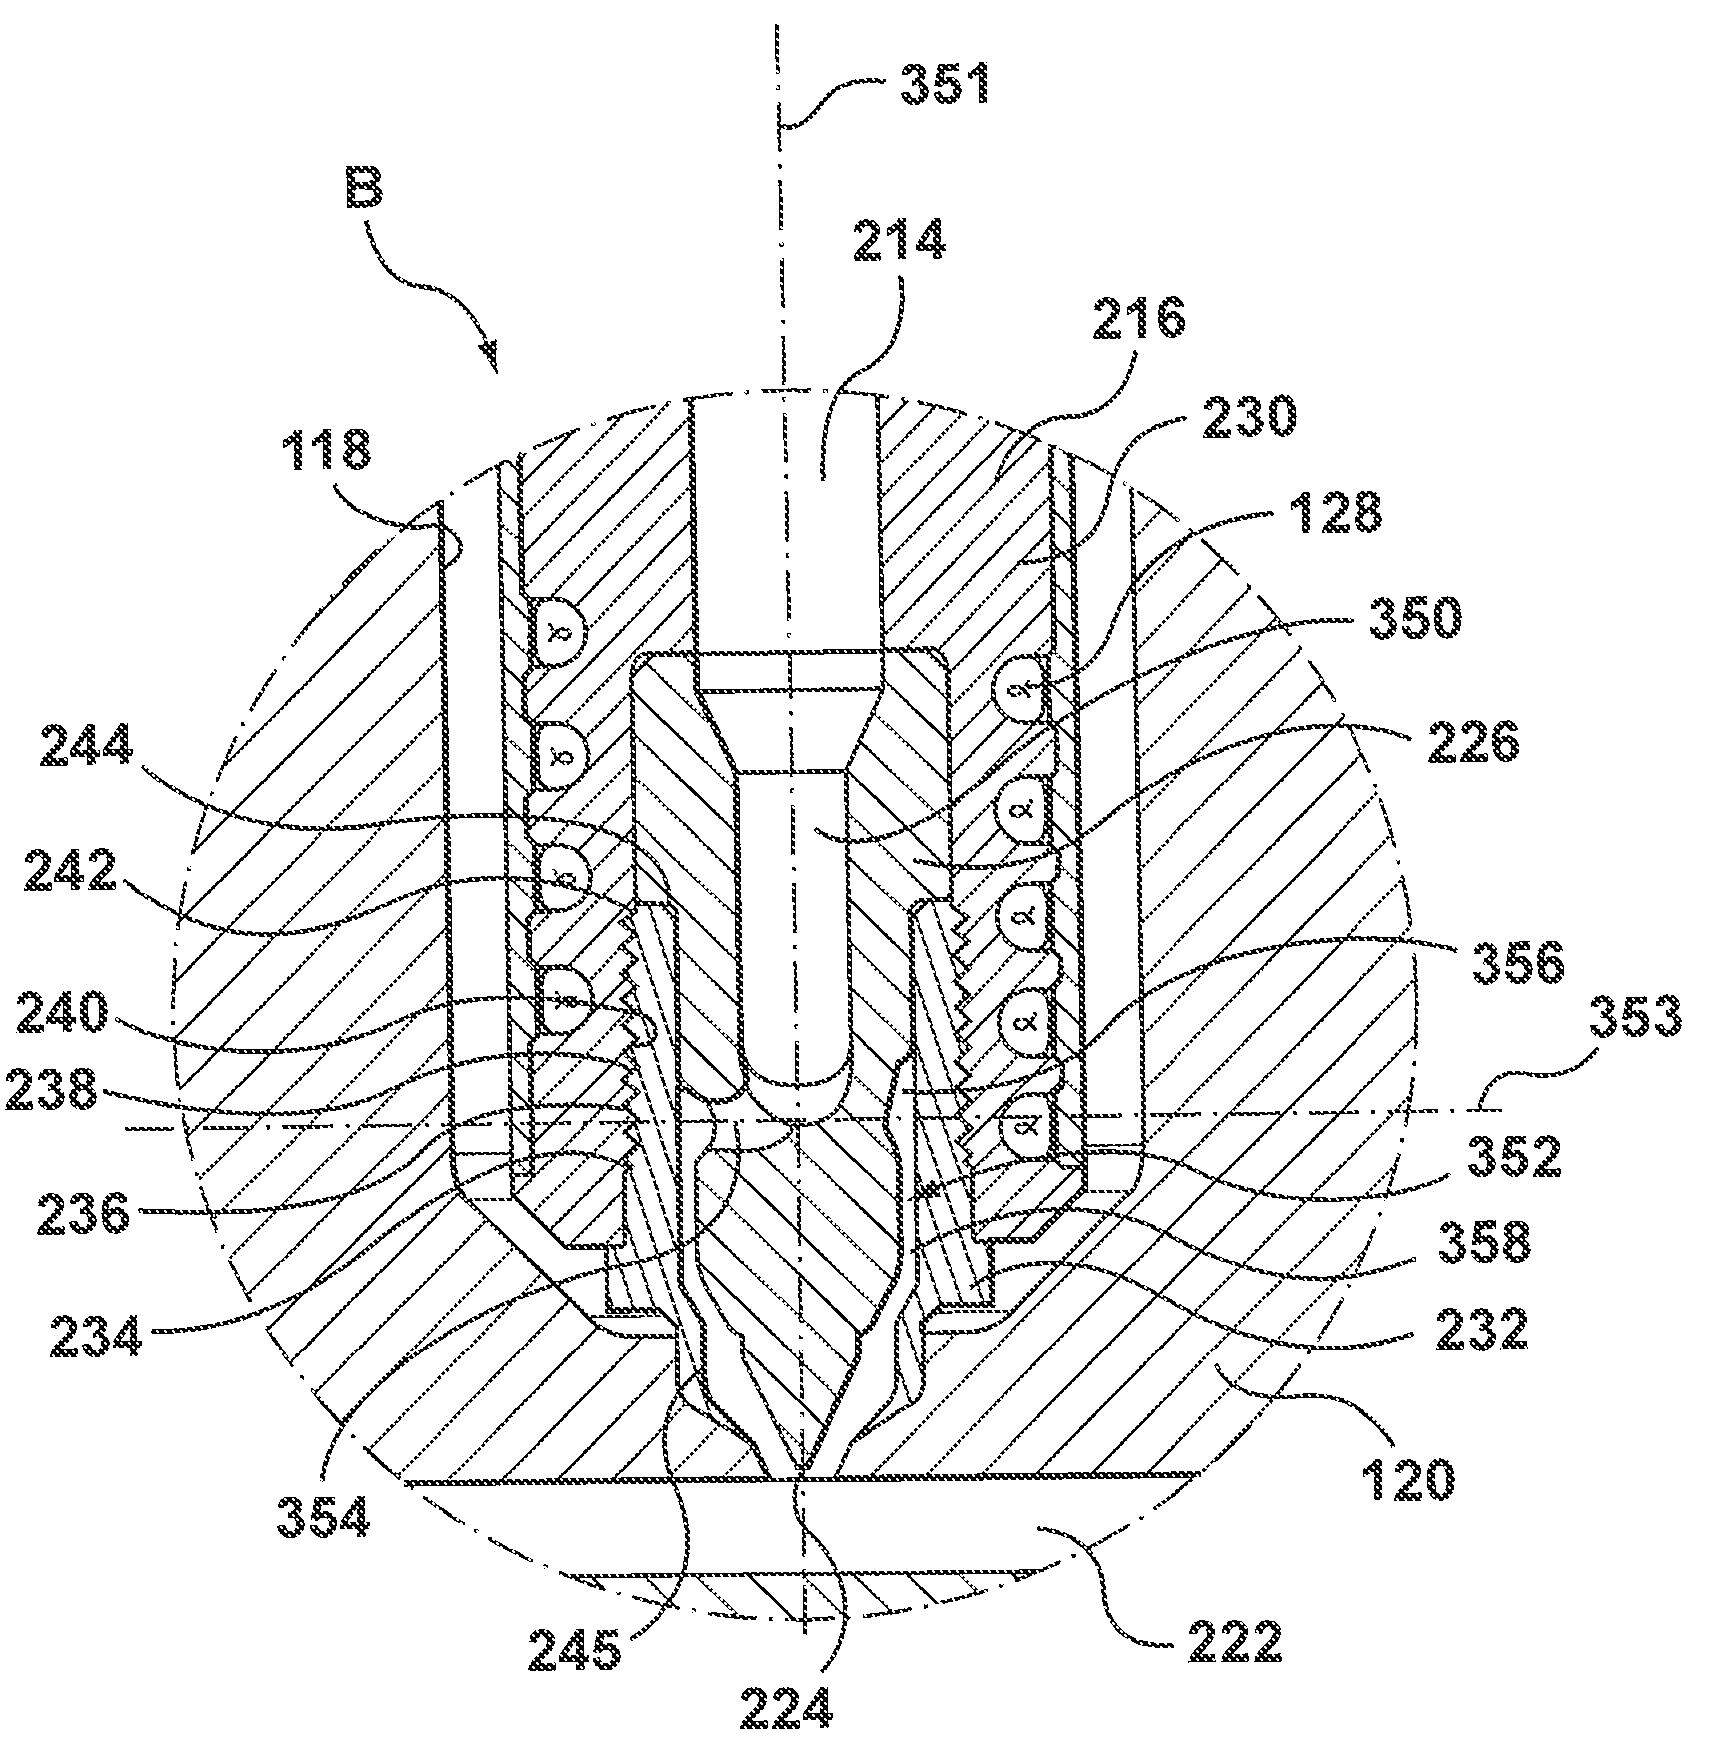 Injection molding nozzle having an annular flow tip